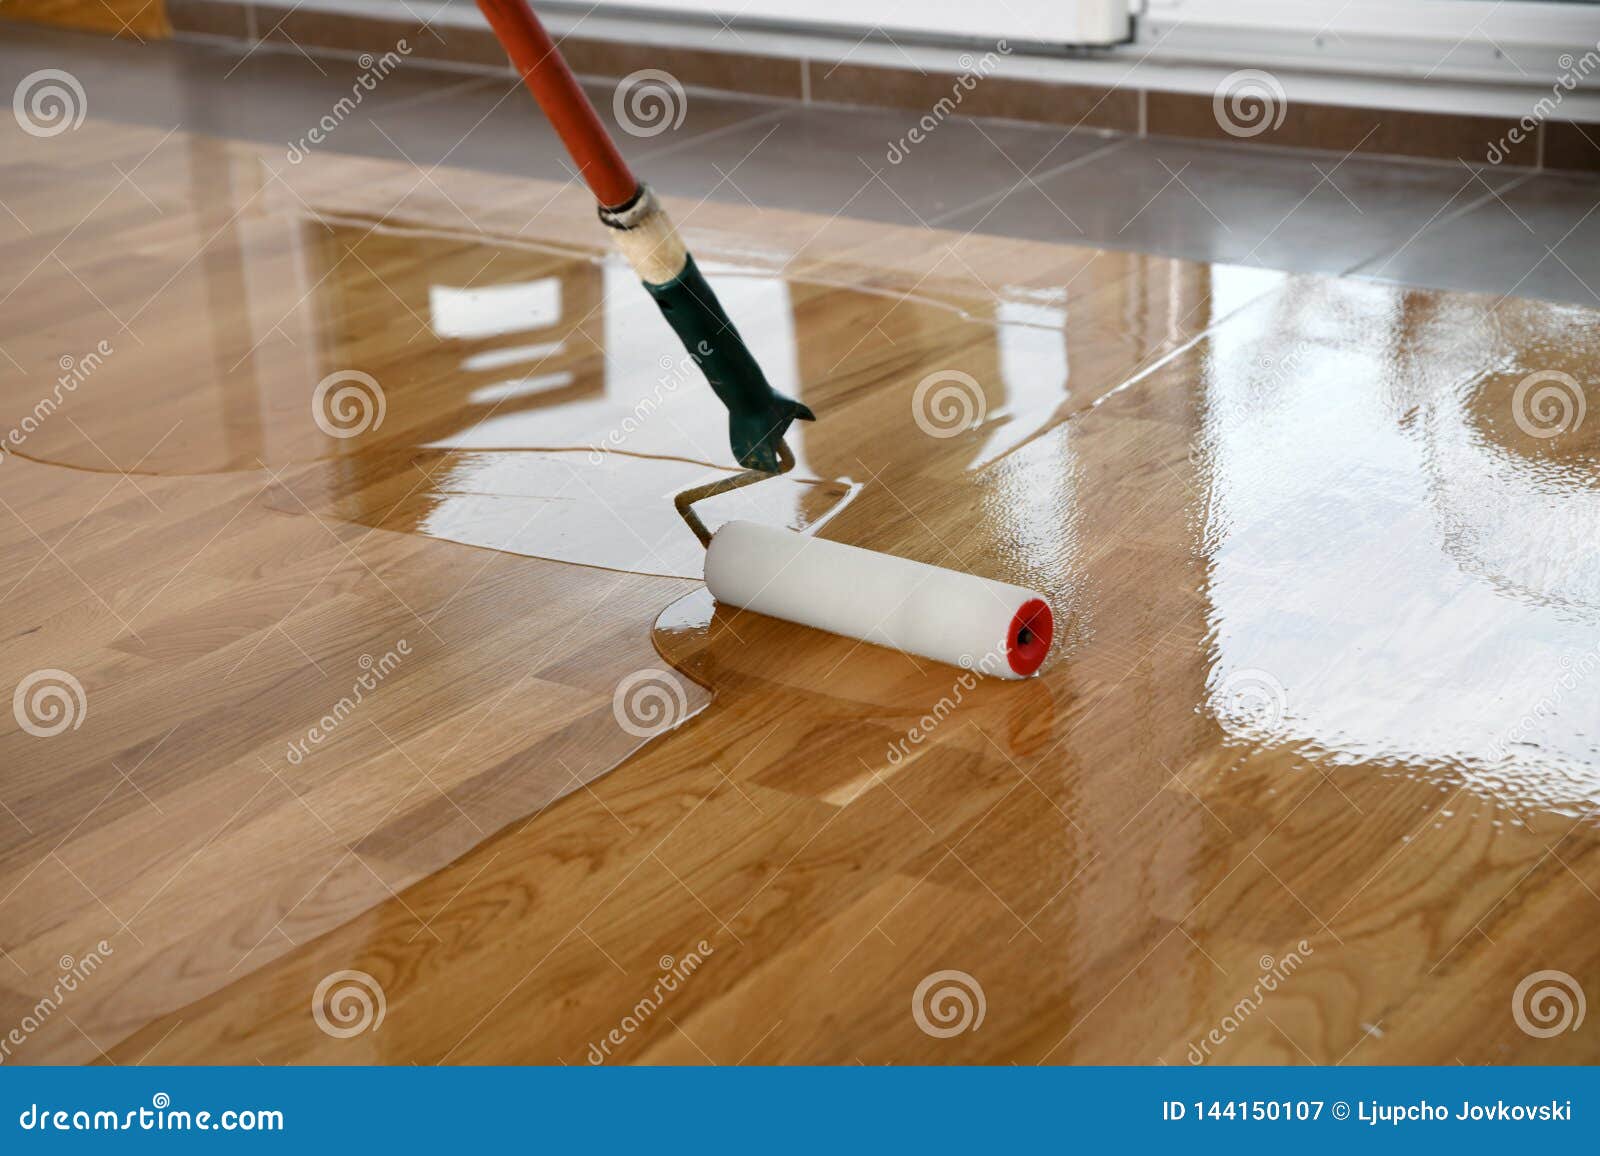 Lacquering Wood Floors Worker Uses A Roller To Coating Floors